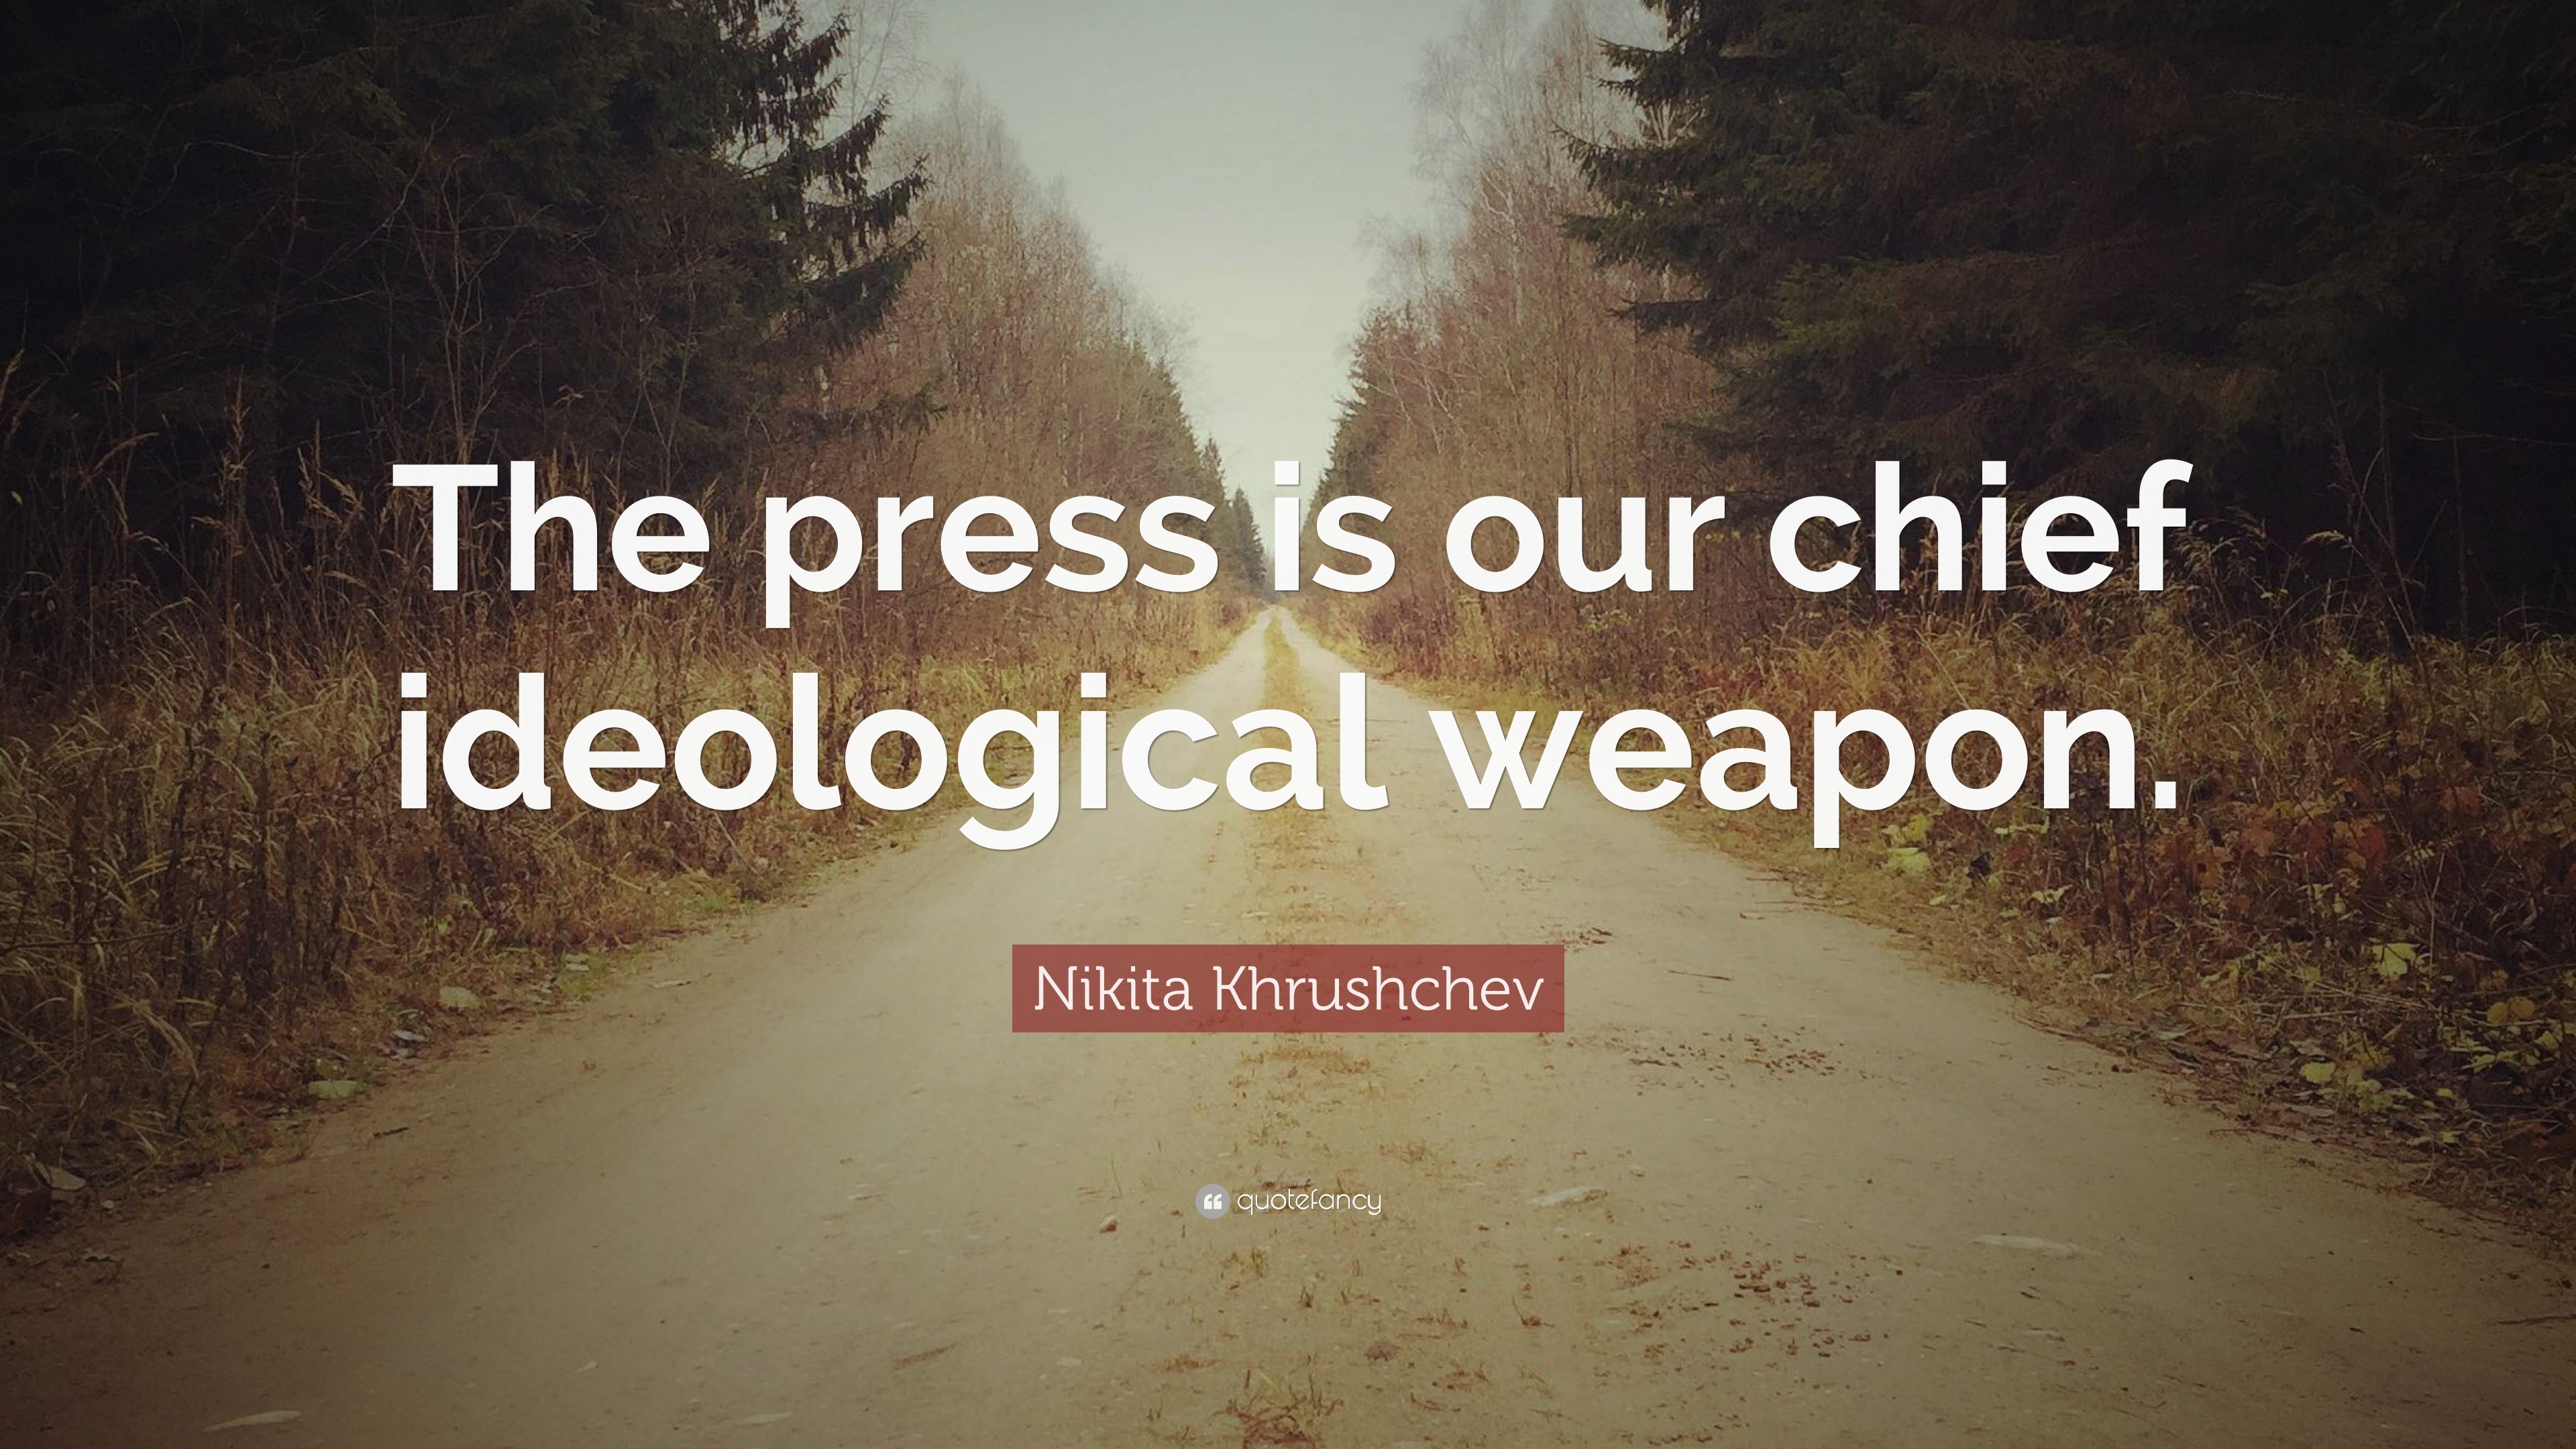 980125-Nikita-Khrushchev-Quote-The-press-is-our-chief-ideological-weapon.jpg